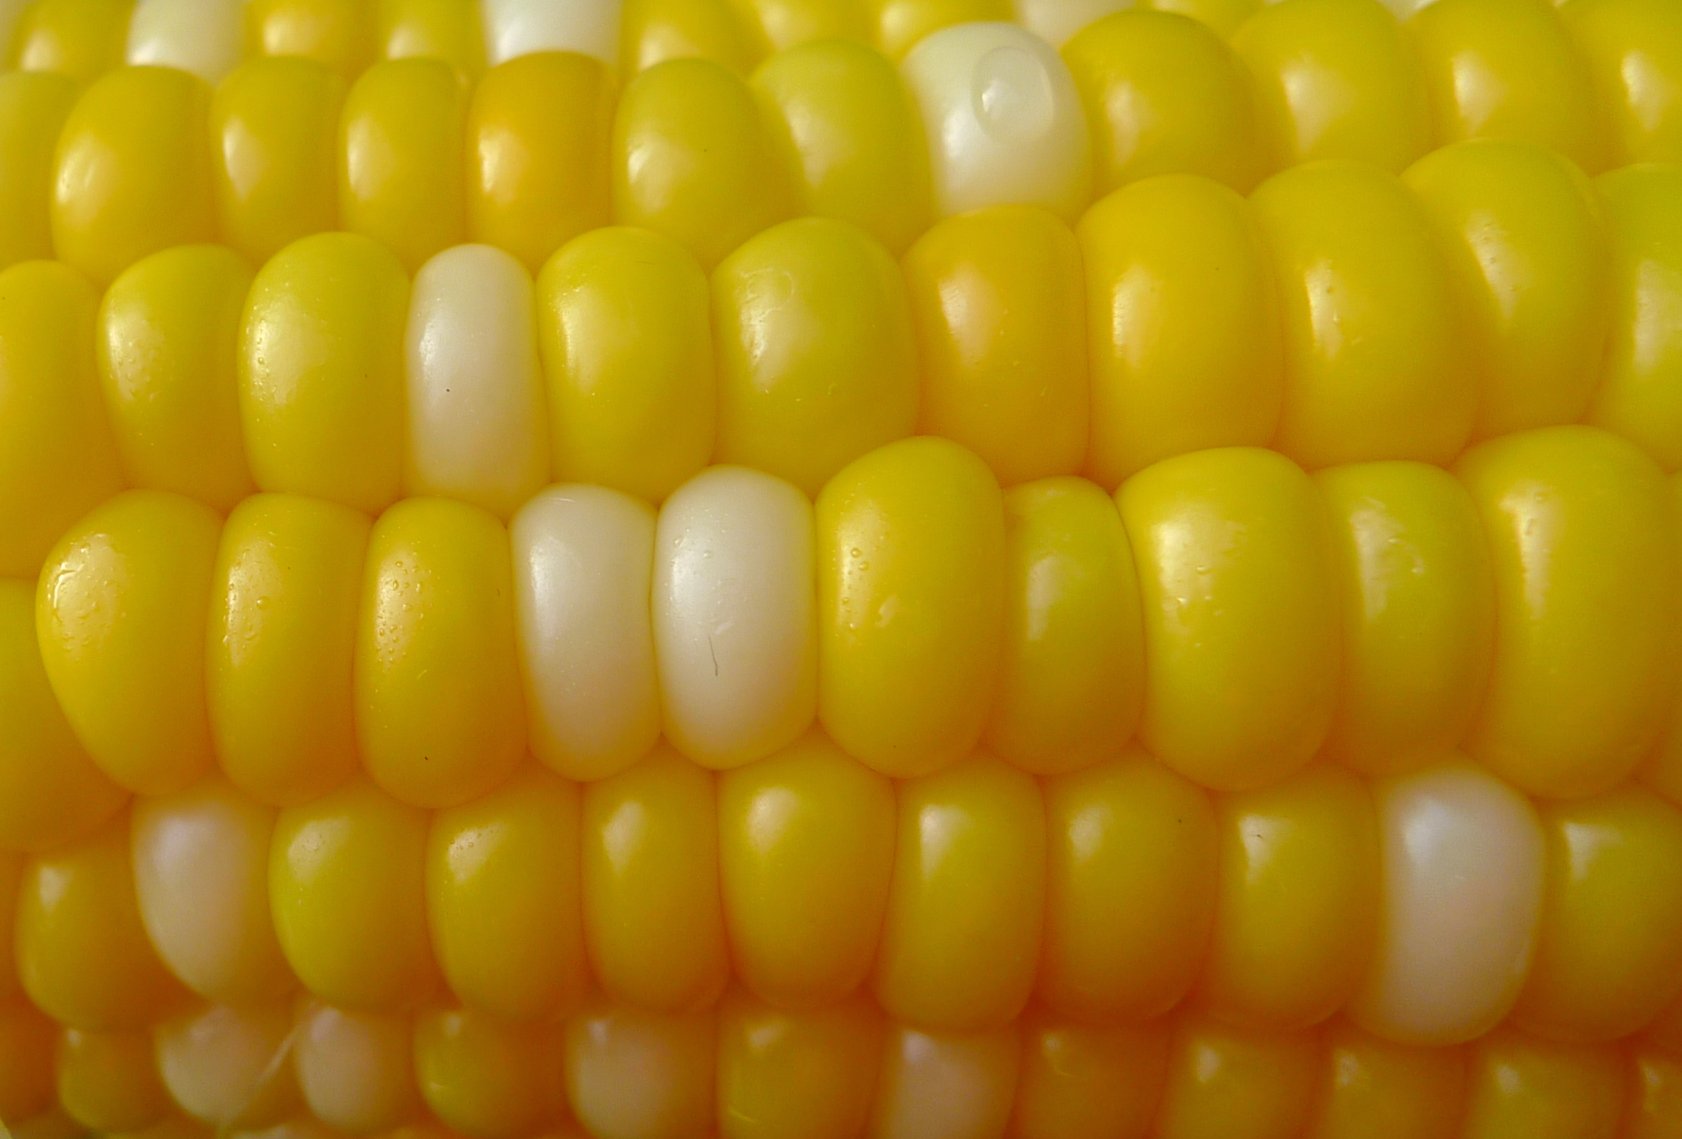 yellow ear of corn on the cob with some white kernel